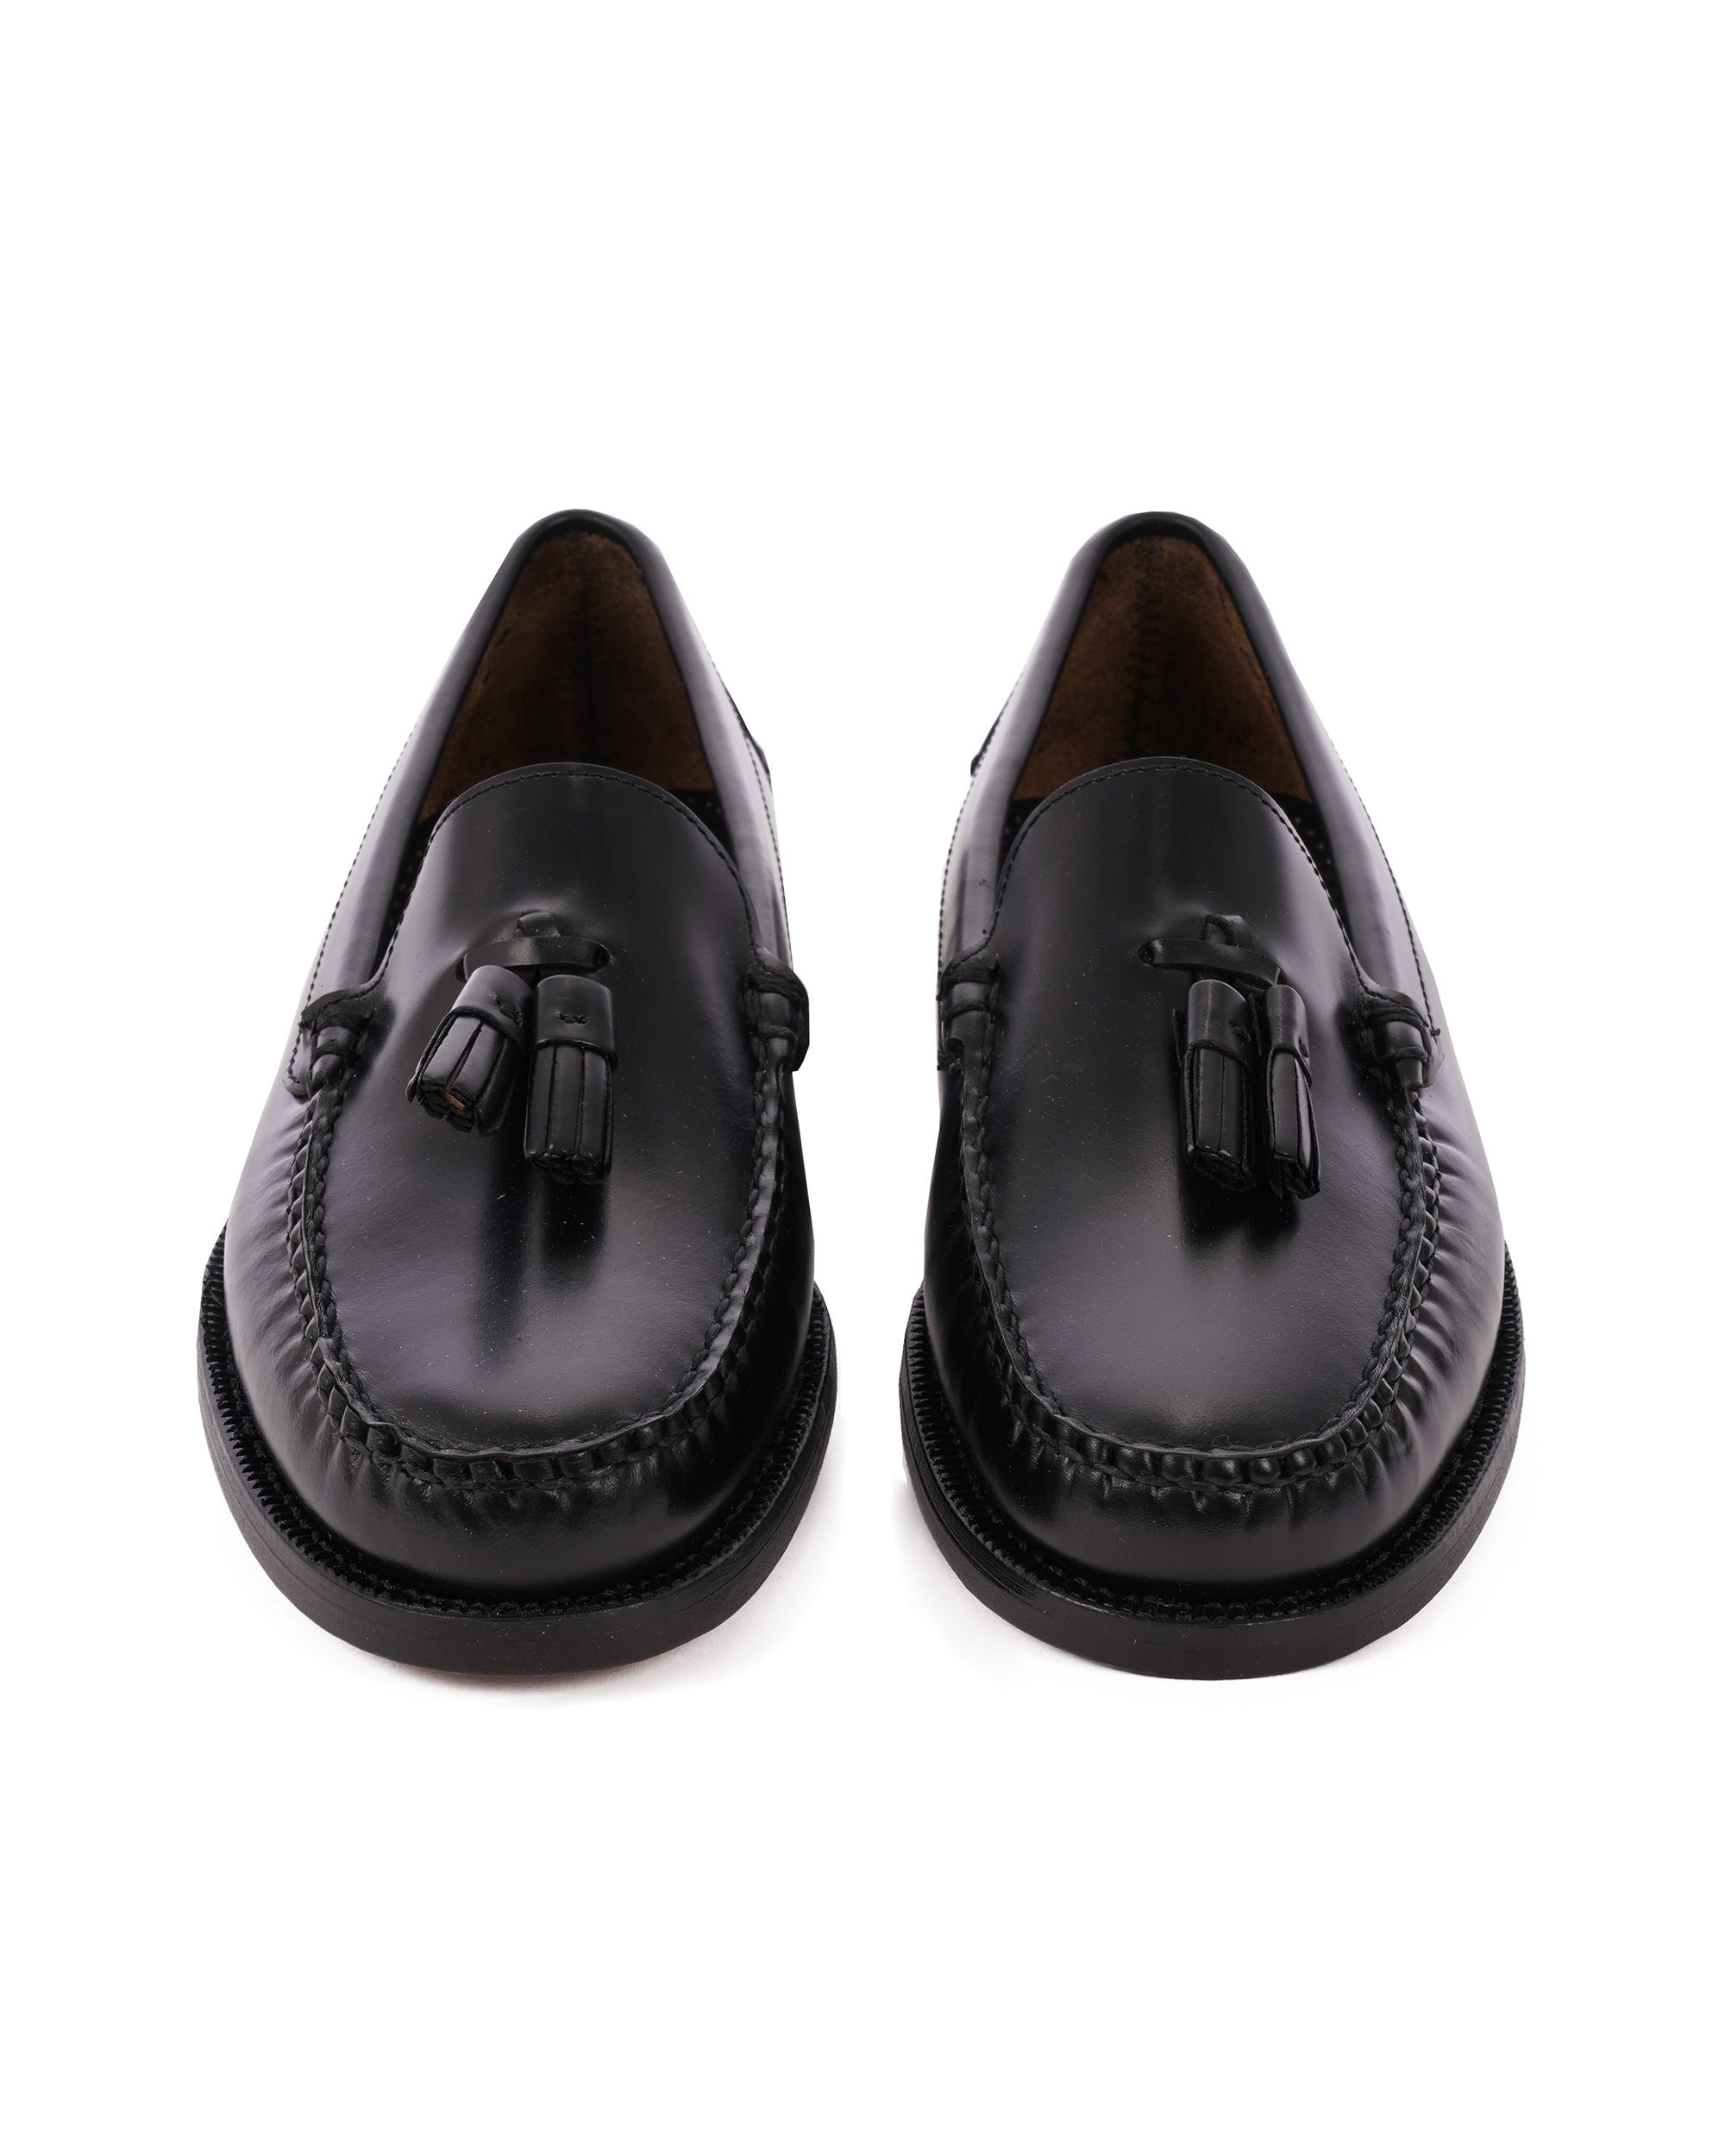 Womens Classic Will Loafer - Black